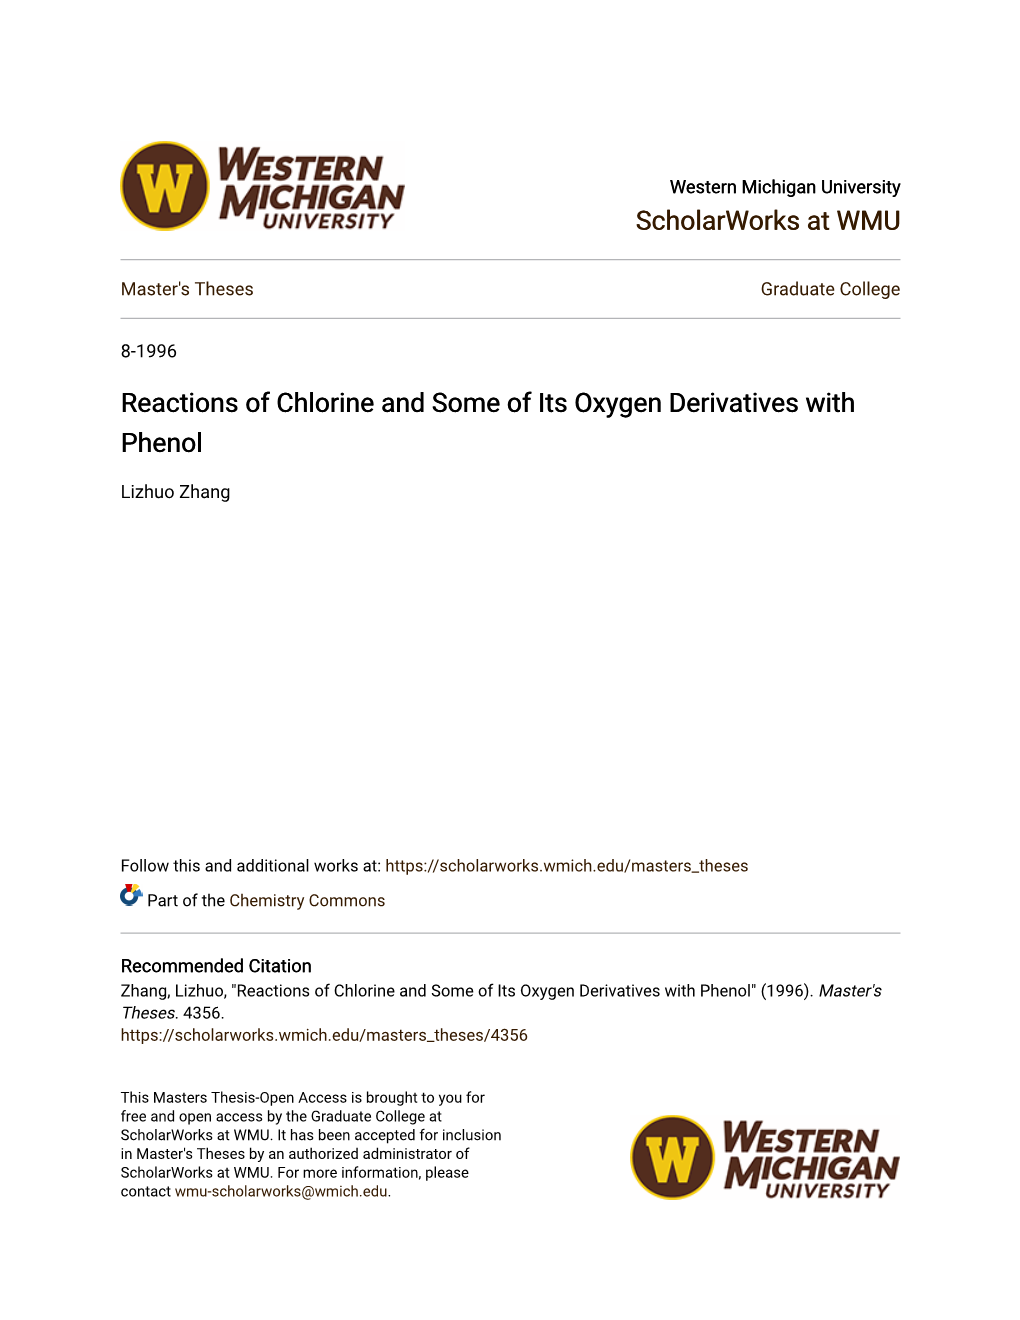 Reactions of Chlorine and Some of Its Oxygen Derivatives with Phenol